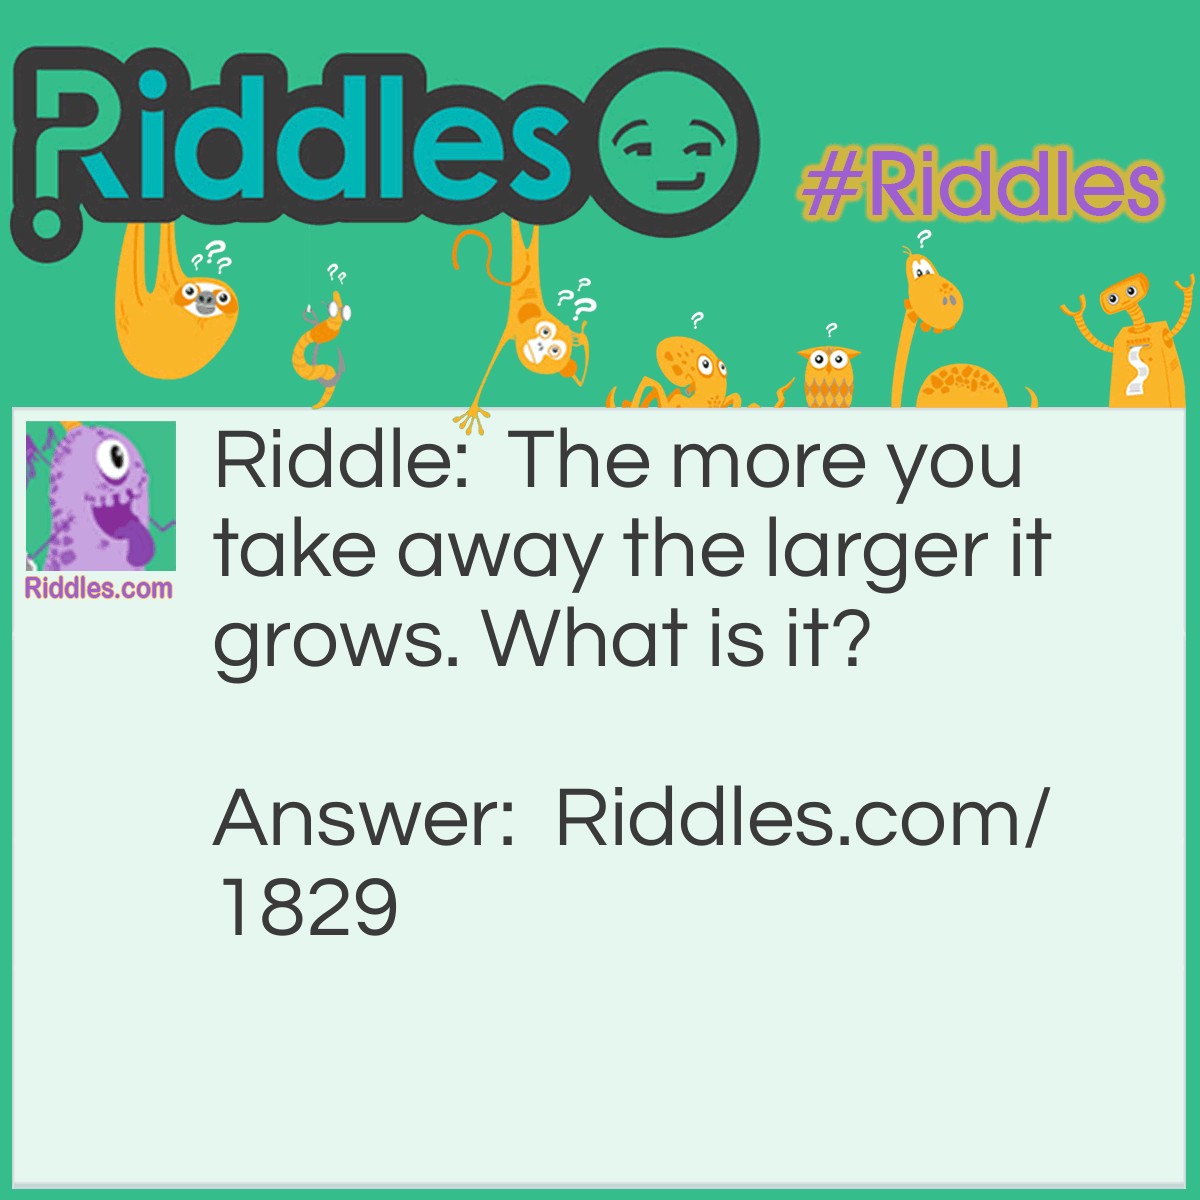 Riddle: The more you take away the larger it grows. What is it? Answer: A hole.